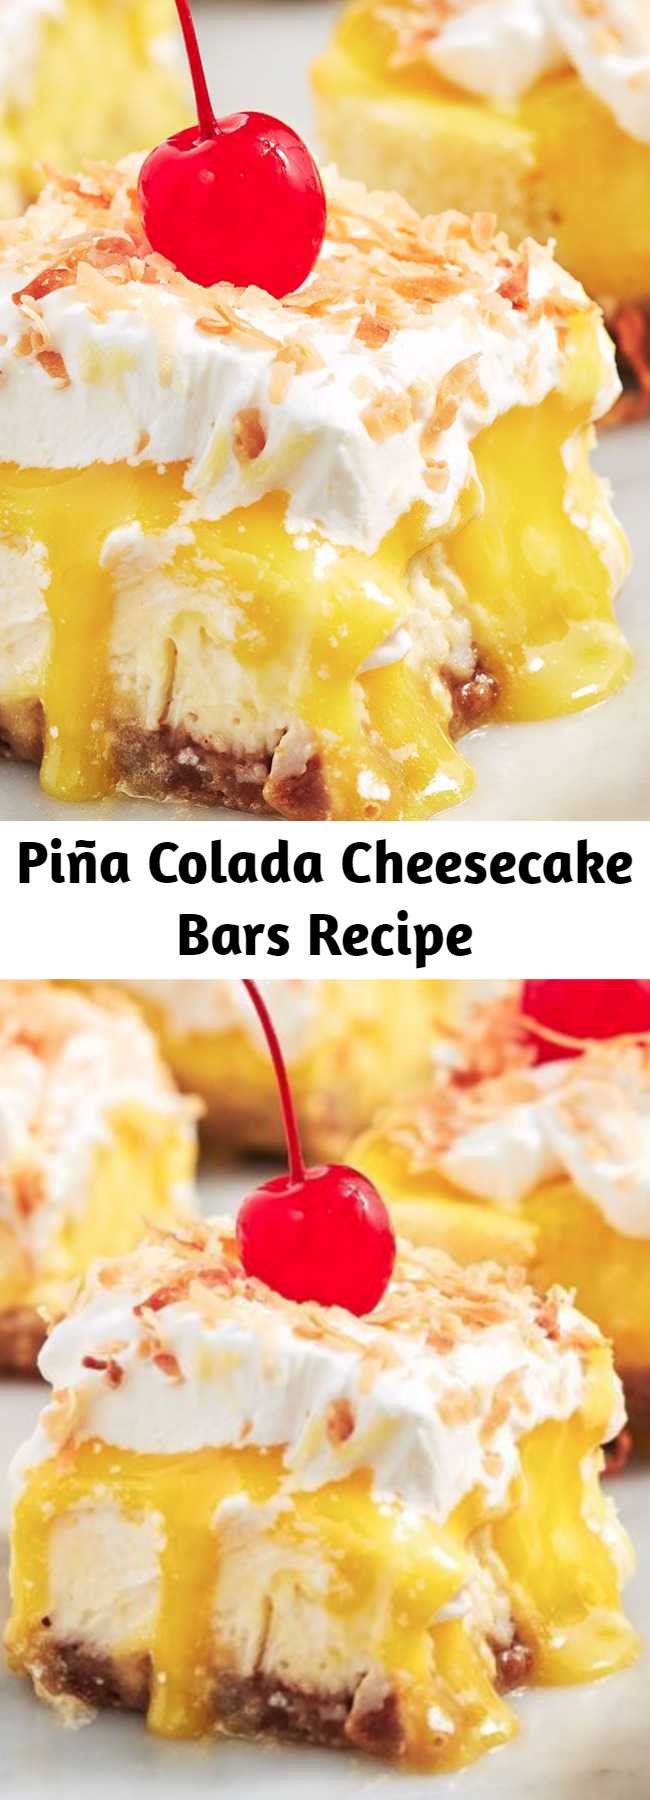 Piña Colada Cheesecake Bars Recipe - The pineapple curd on these bars is TOO good. One bite will transport you to the beach, piña colada in hand. 😎